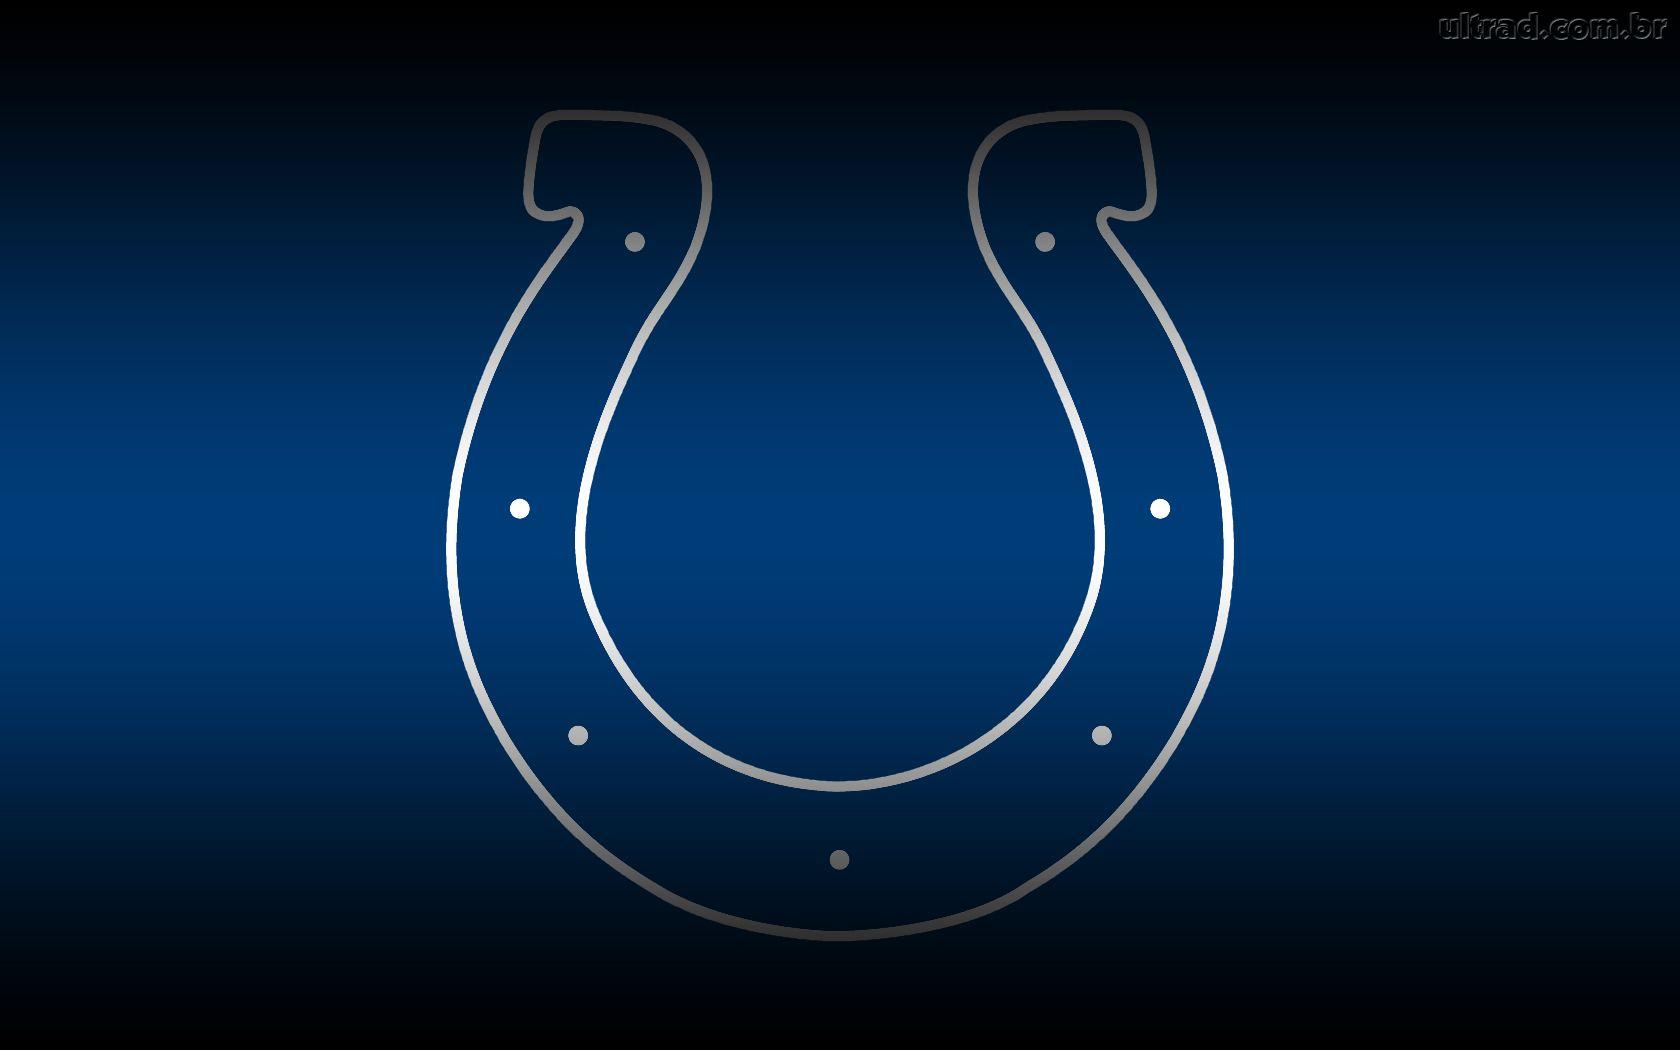 Indianapolis Colts iPhone 7 Plus Wallpaper  2023 NFL Football Wallpapers   Iphone 7 plus wallpaper 7 plus wallpaper Indianapolis colts